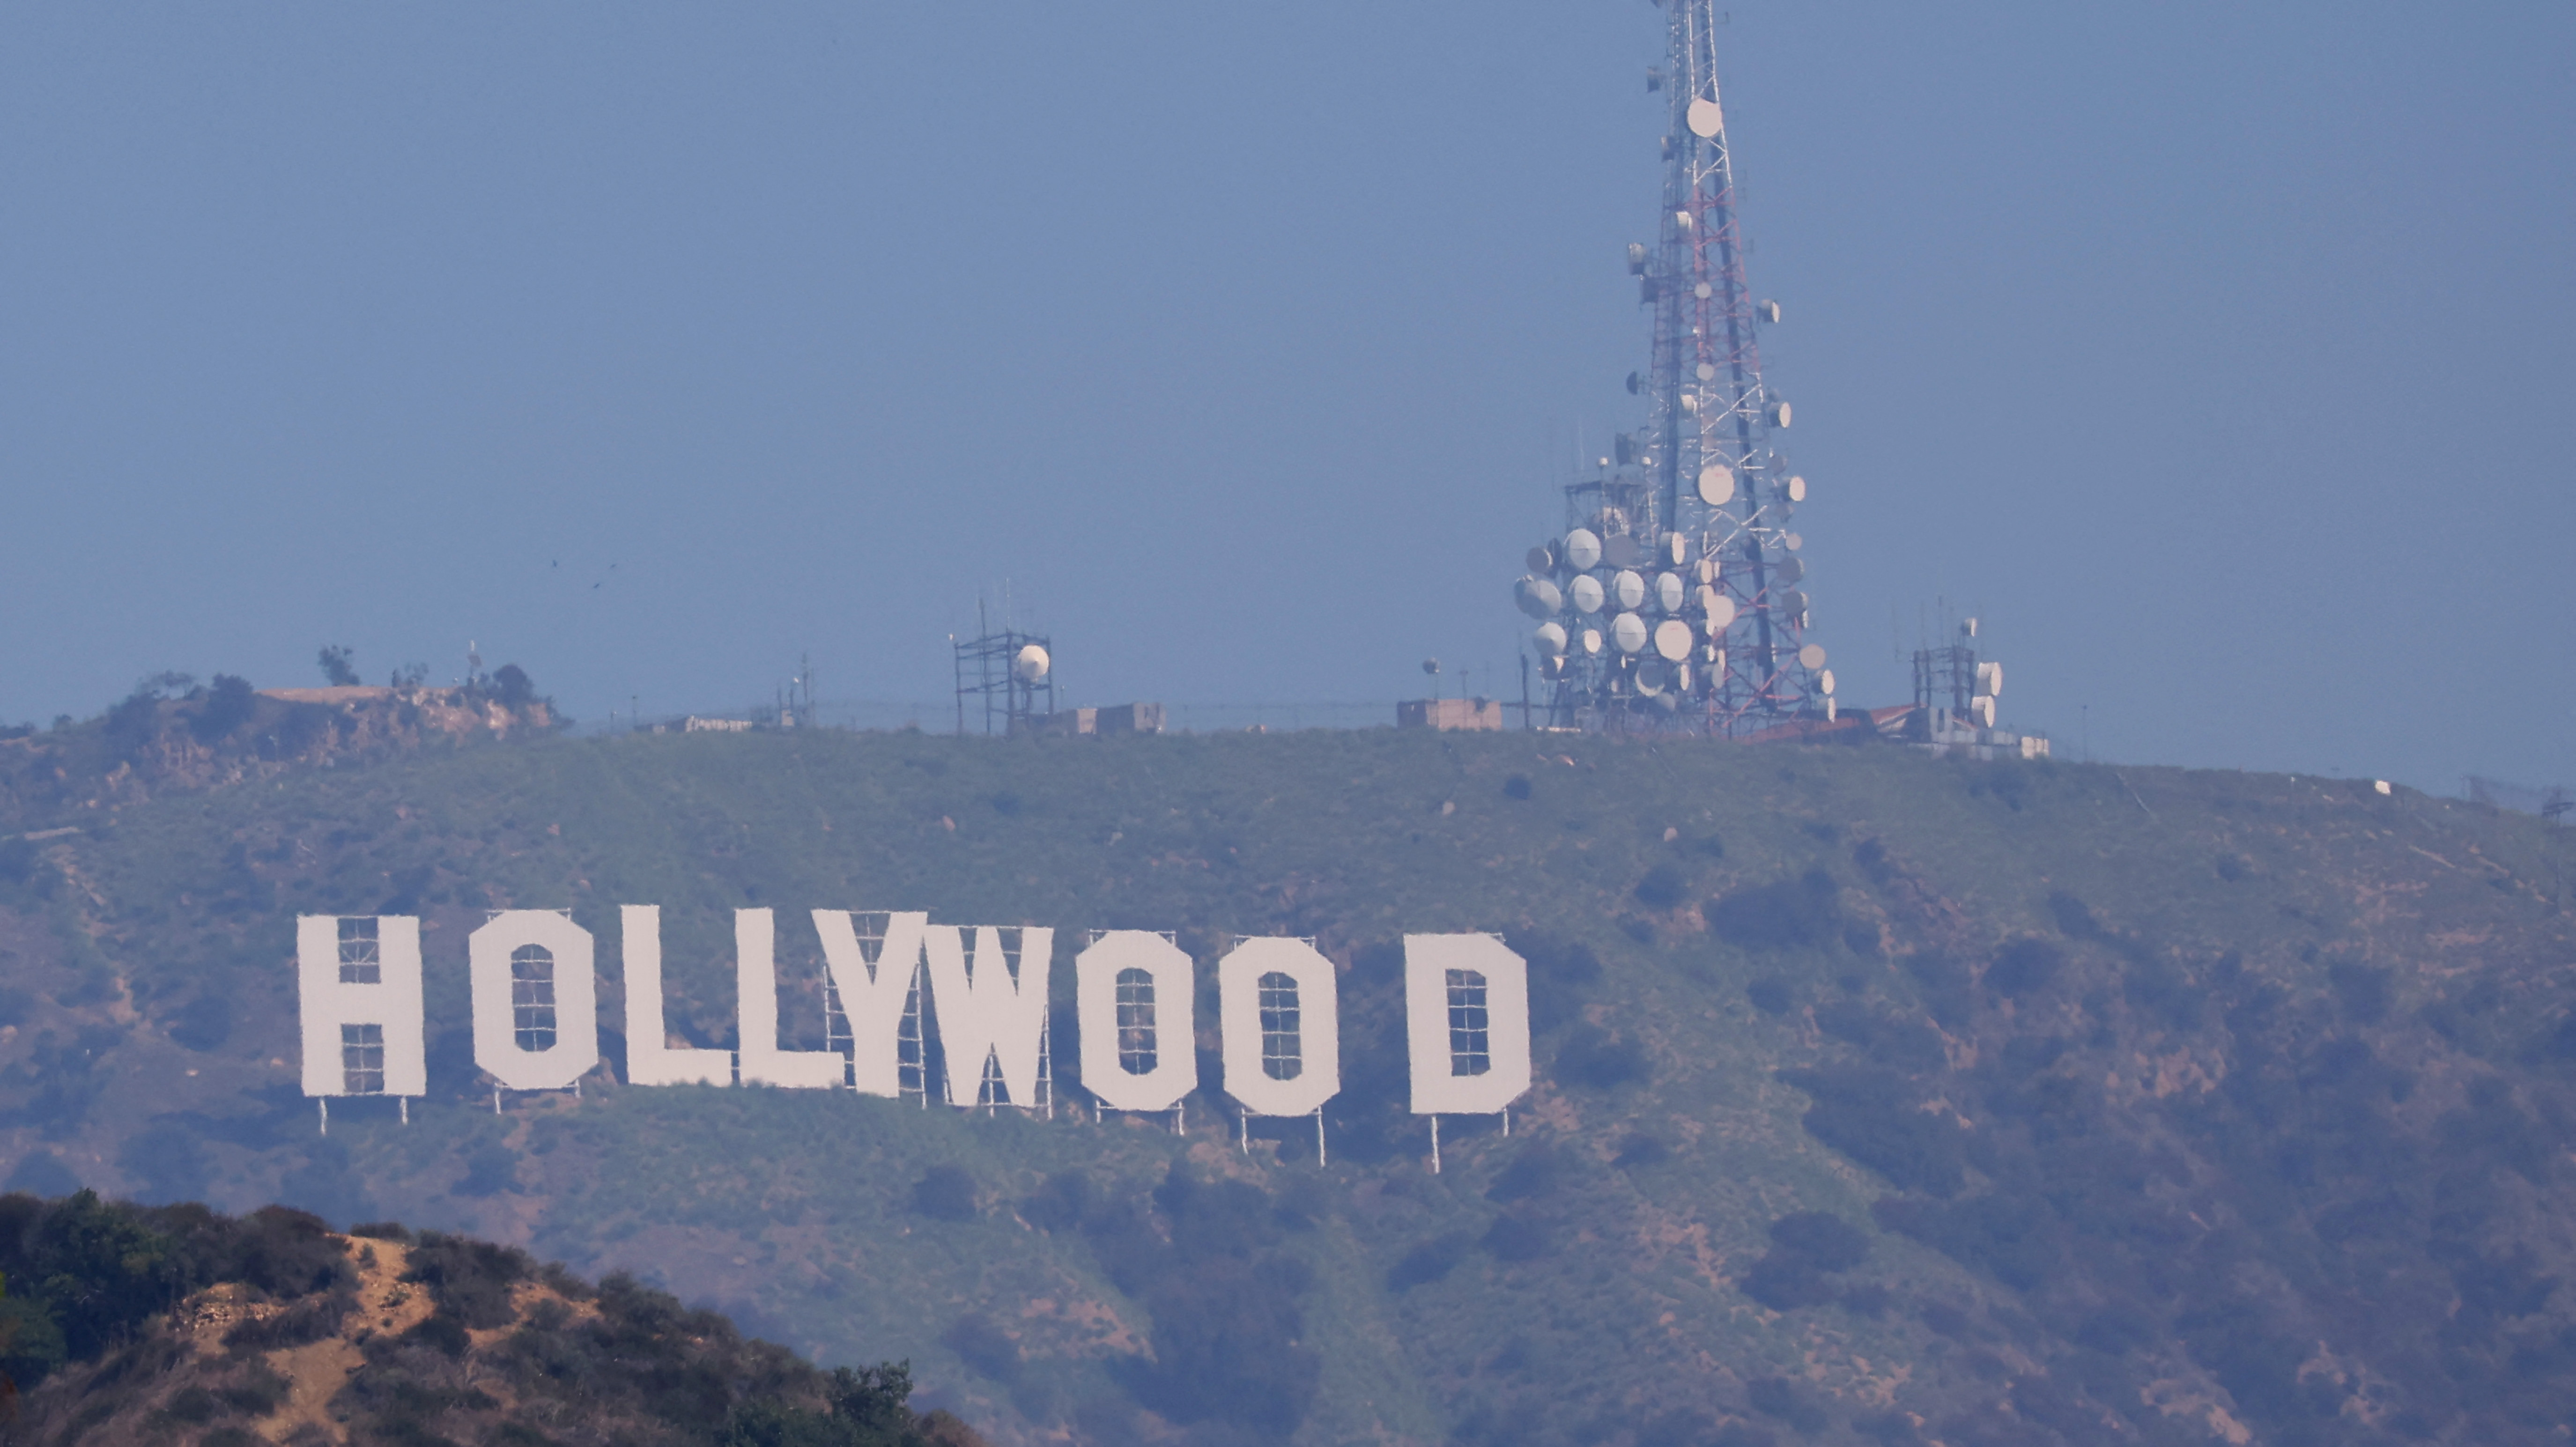 The iconic Hollywood sign is pictured the day after the Writers Guild of America (WGA) announced it reached a preliminary labor agreement with major studios in Los Angeles